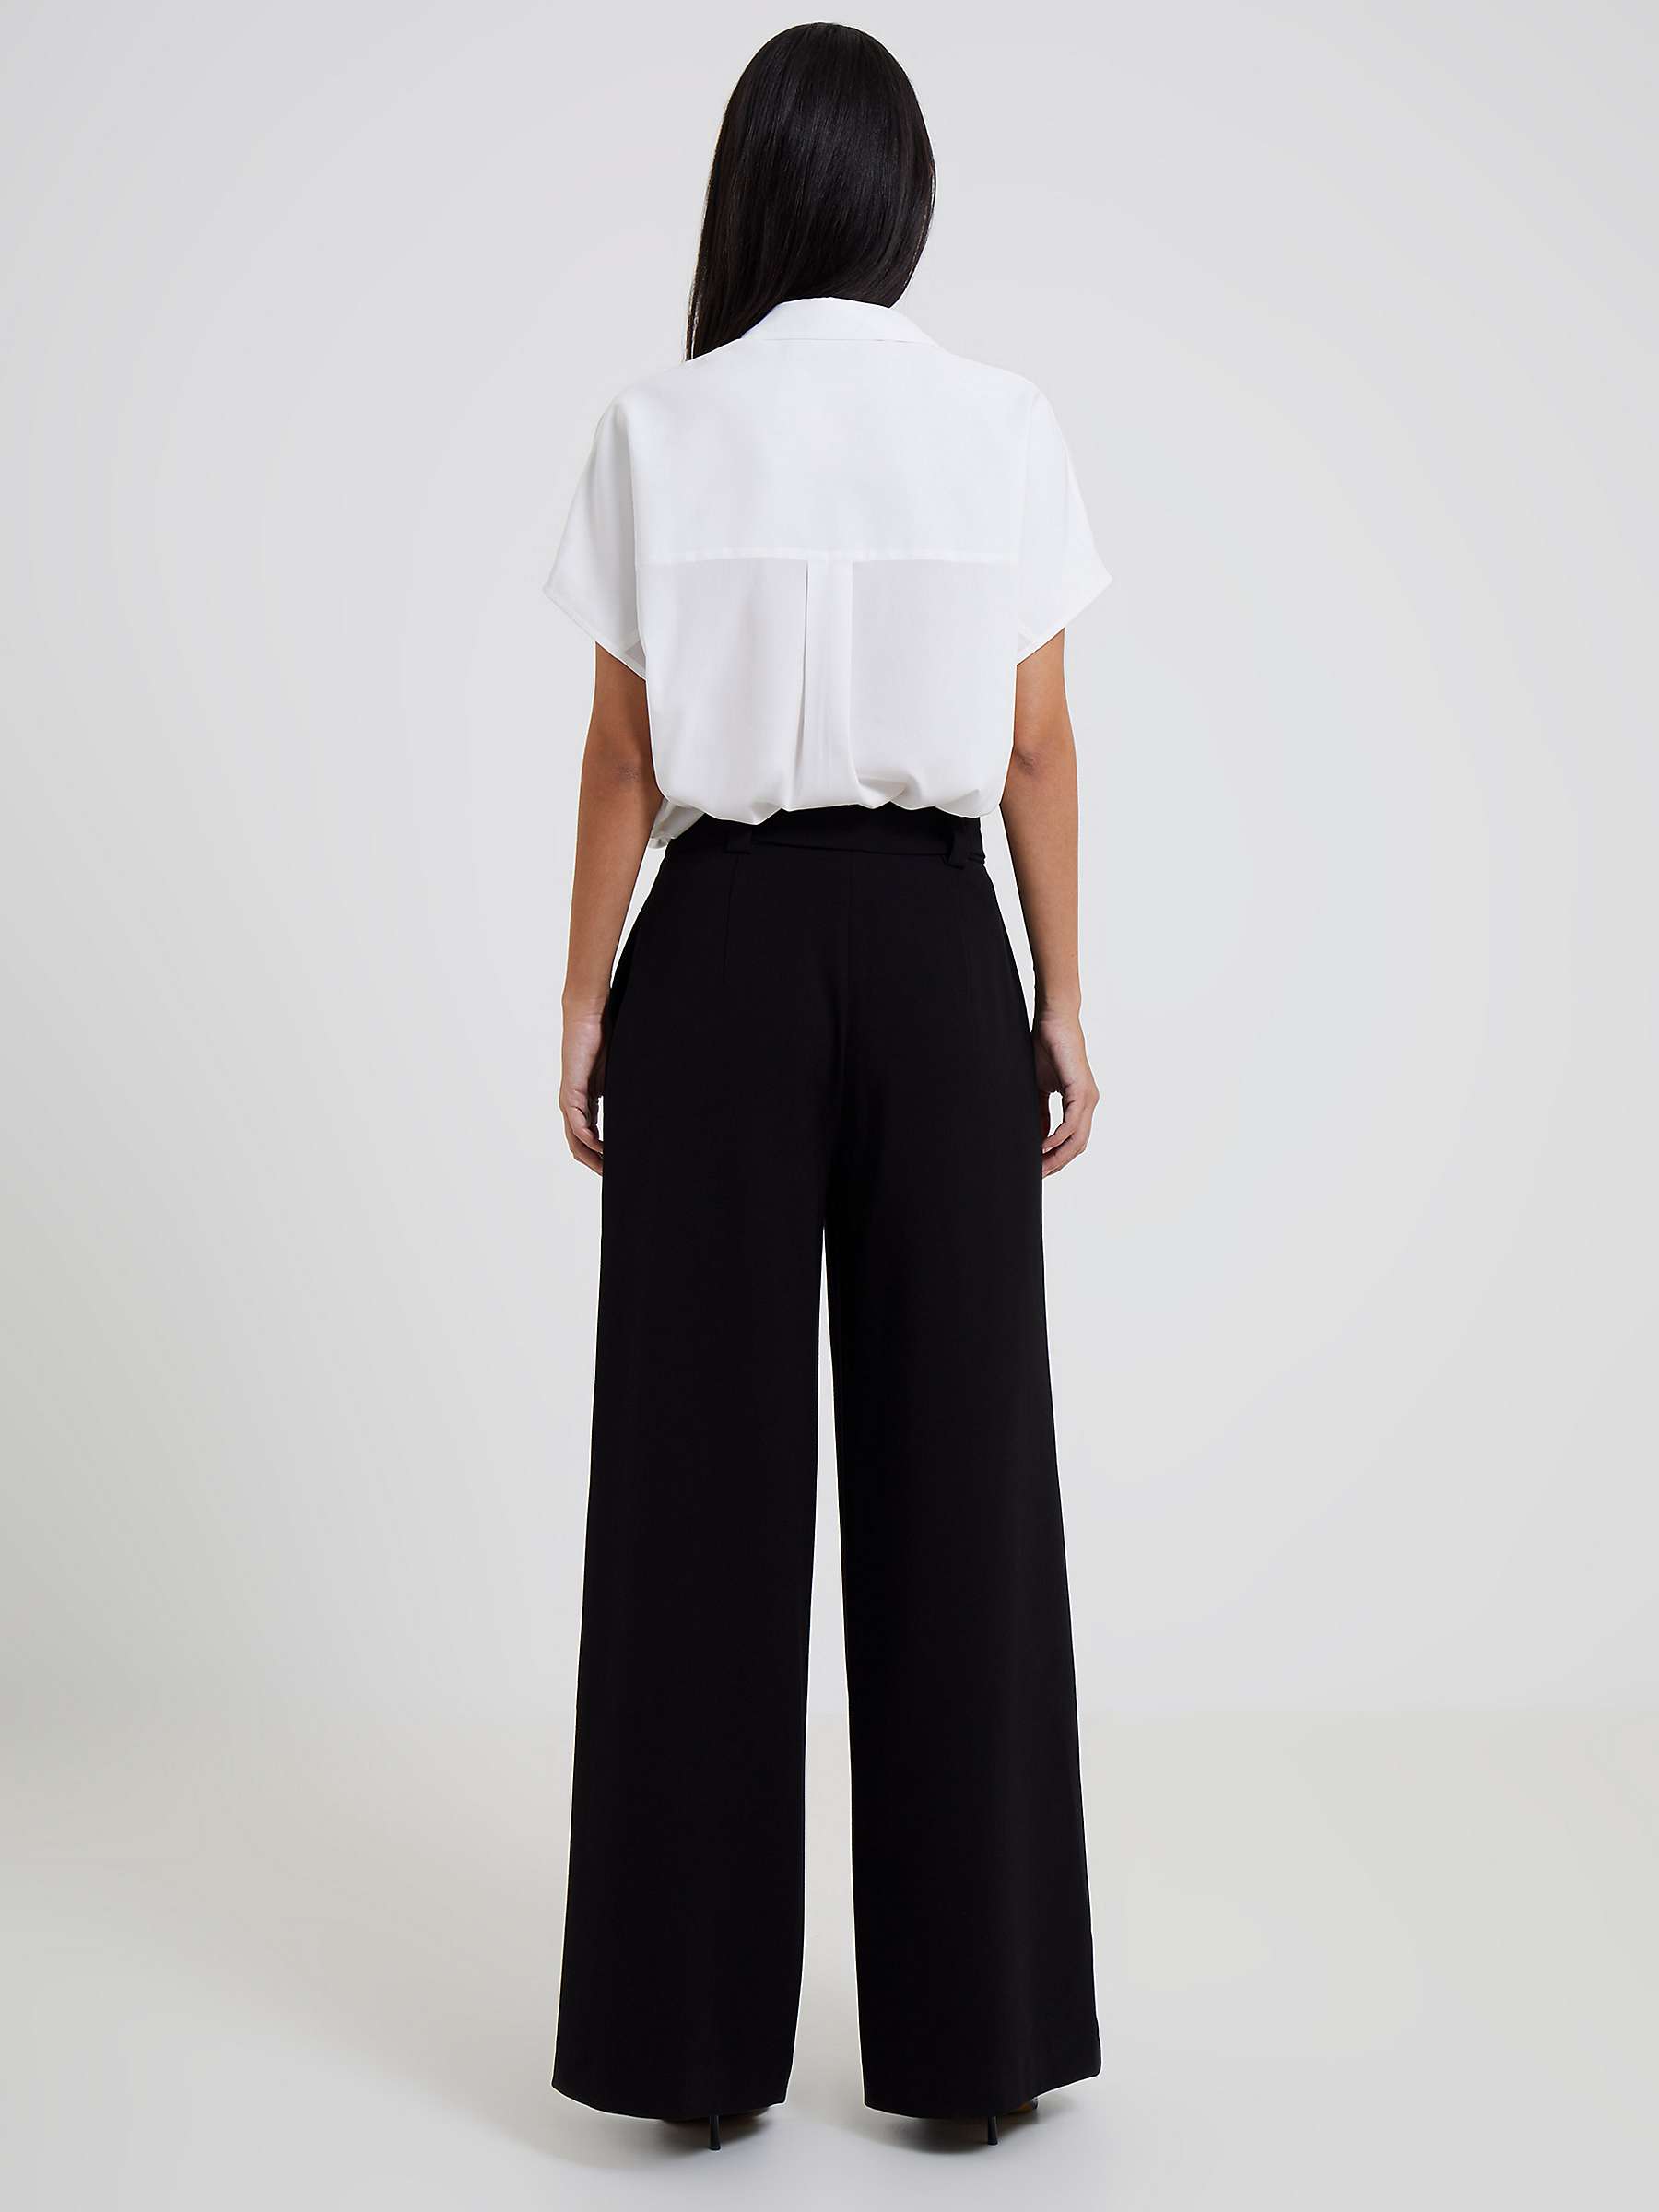 Buy French Connection Wisper Full Length Palazzo Trousers, Black Online at johnlewis.com